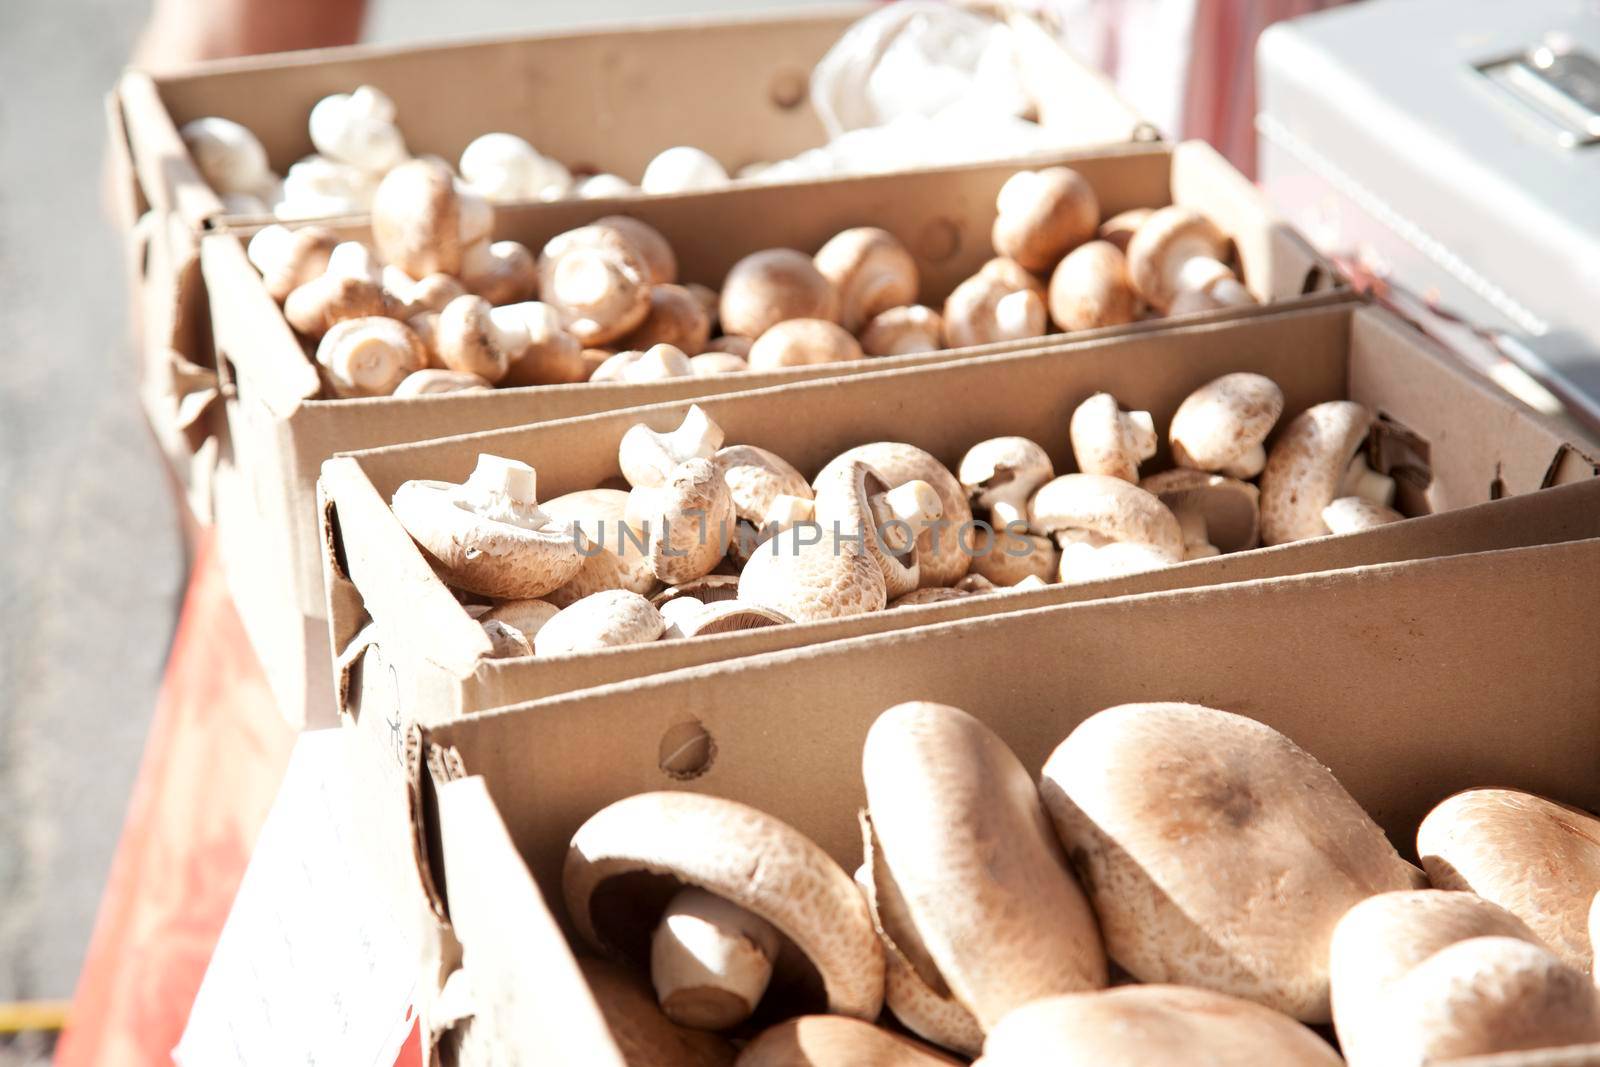  Brown mushrooms in boxes at a market ready to be bought 